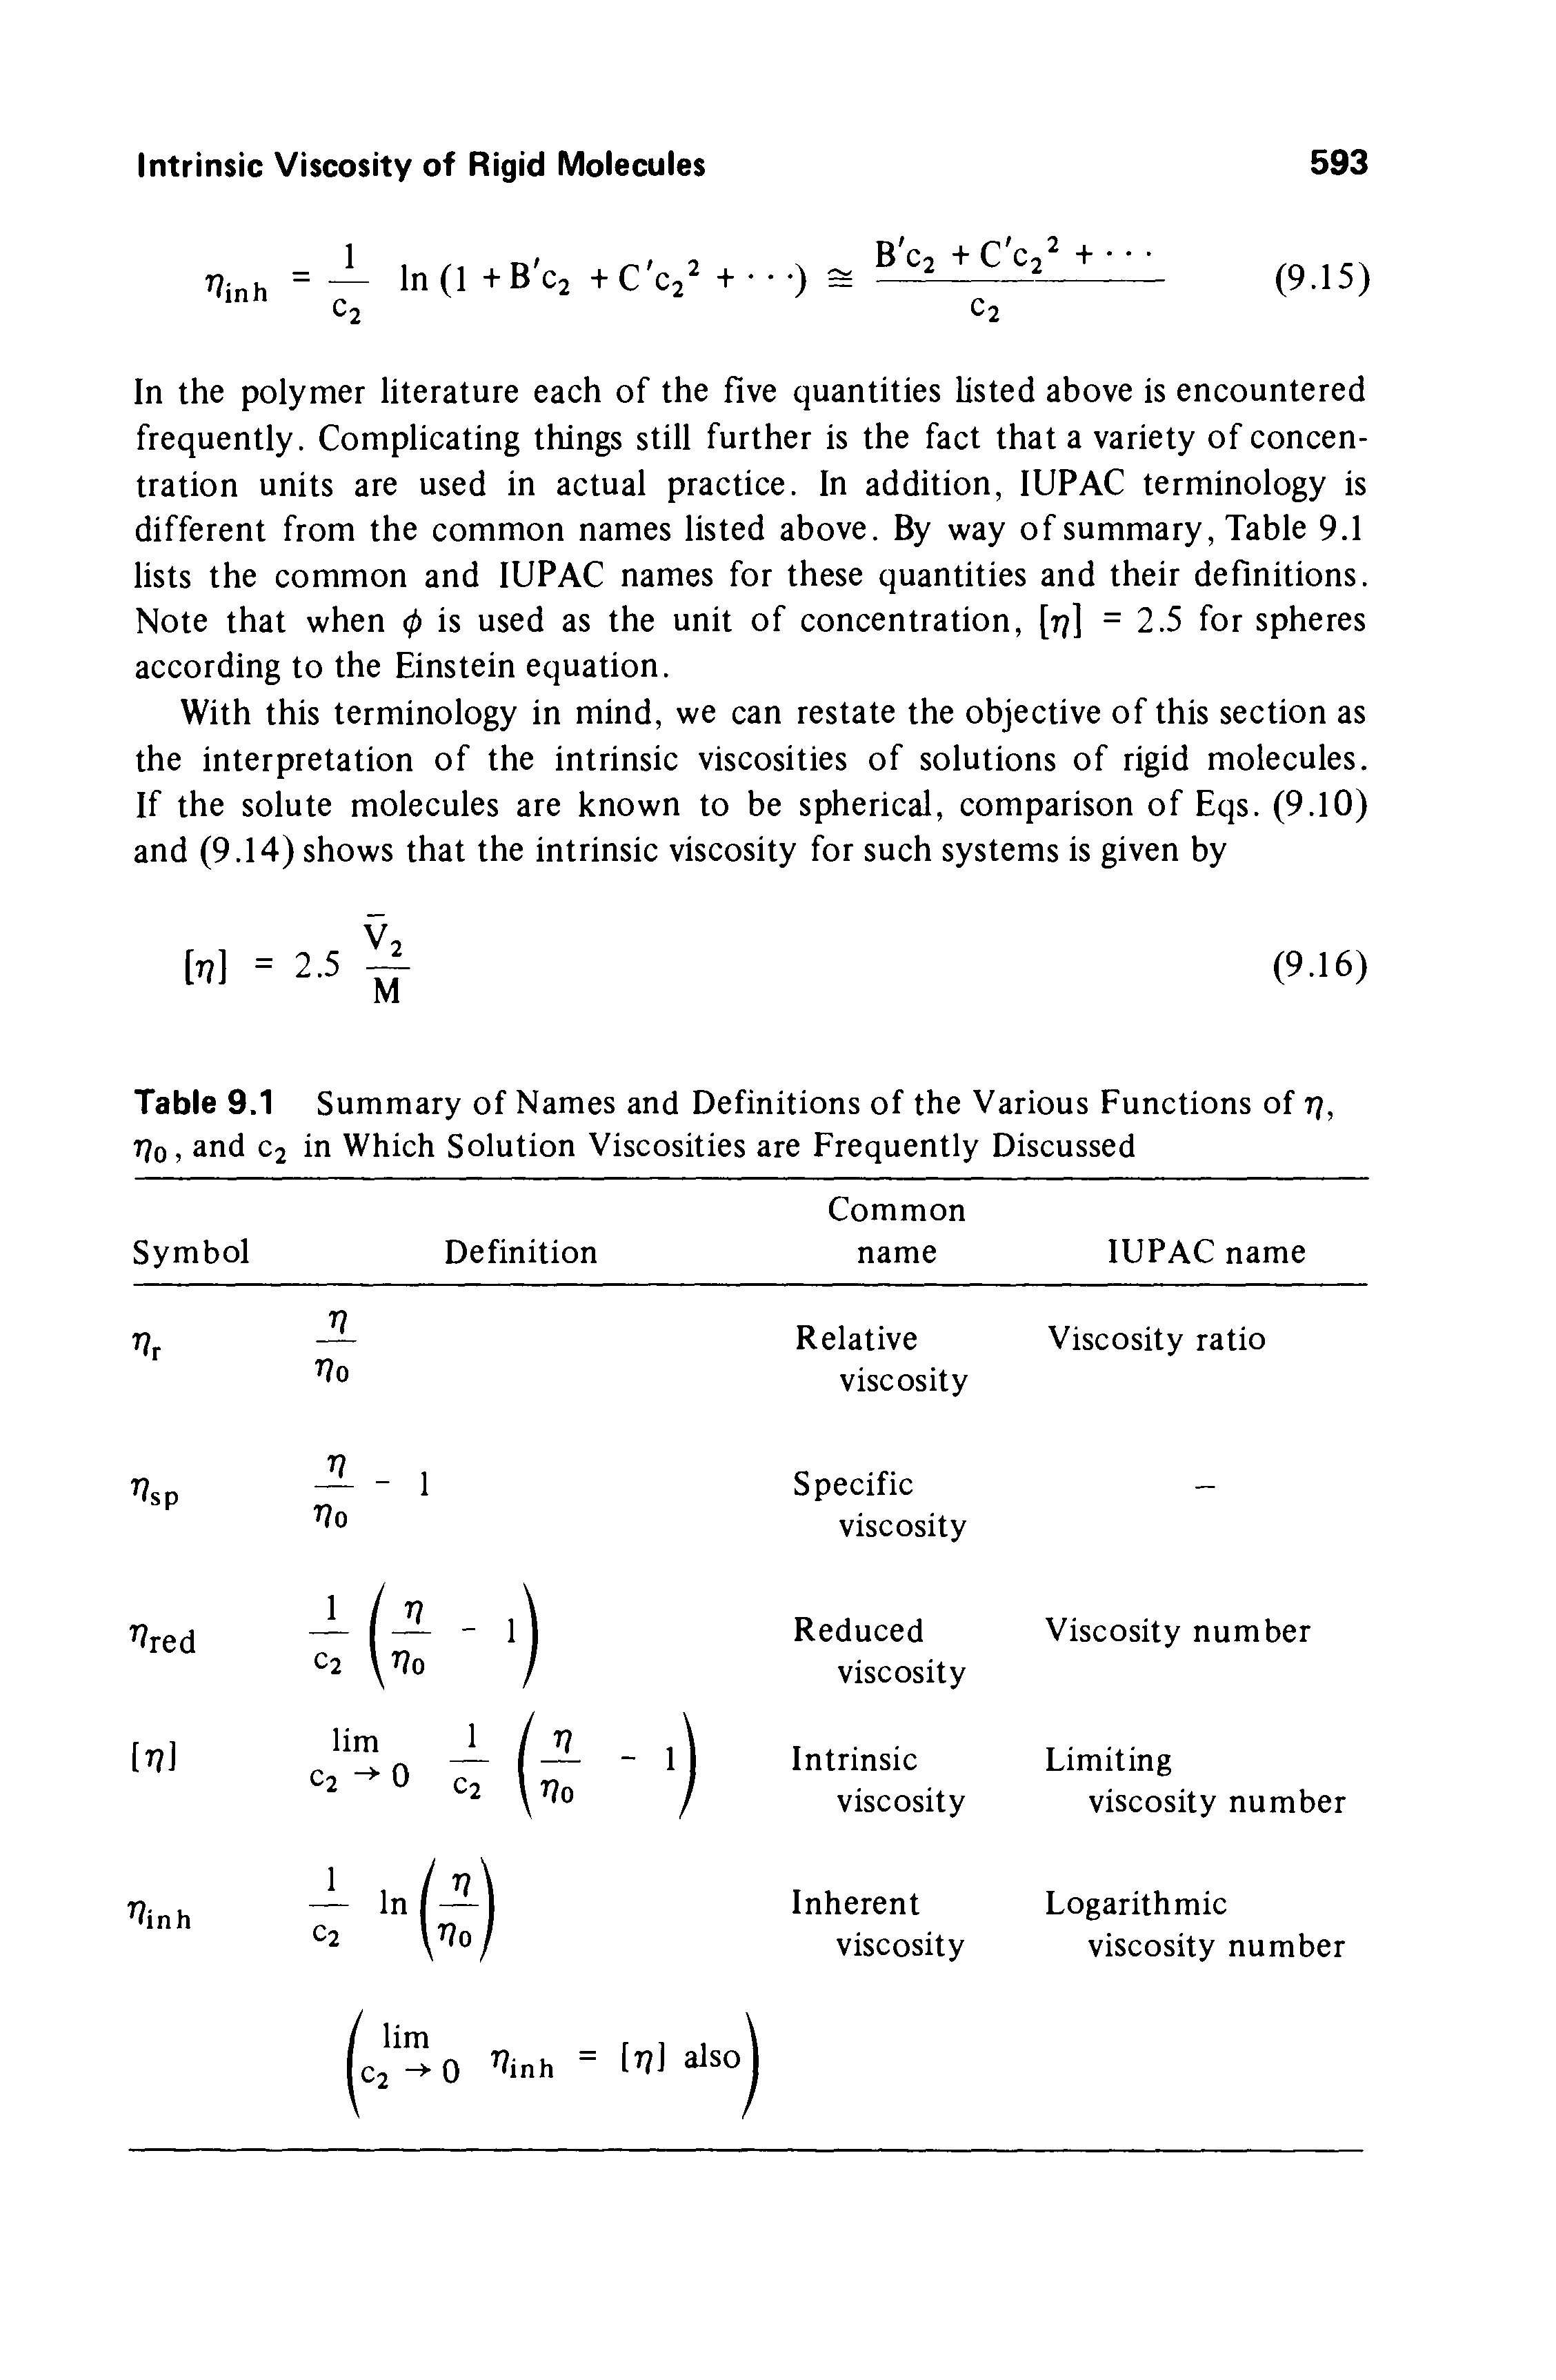 Table 9.1 Summary of Names and Definitions of the Various Functions of 77, 77o, and C2 in Which Solution Viscosities are Frequently Discussed...